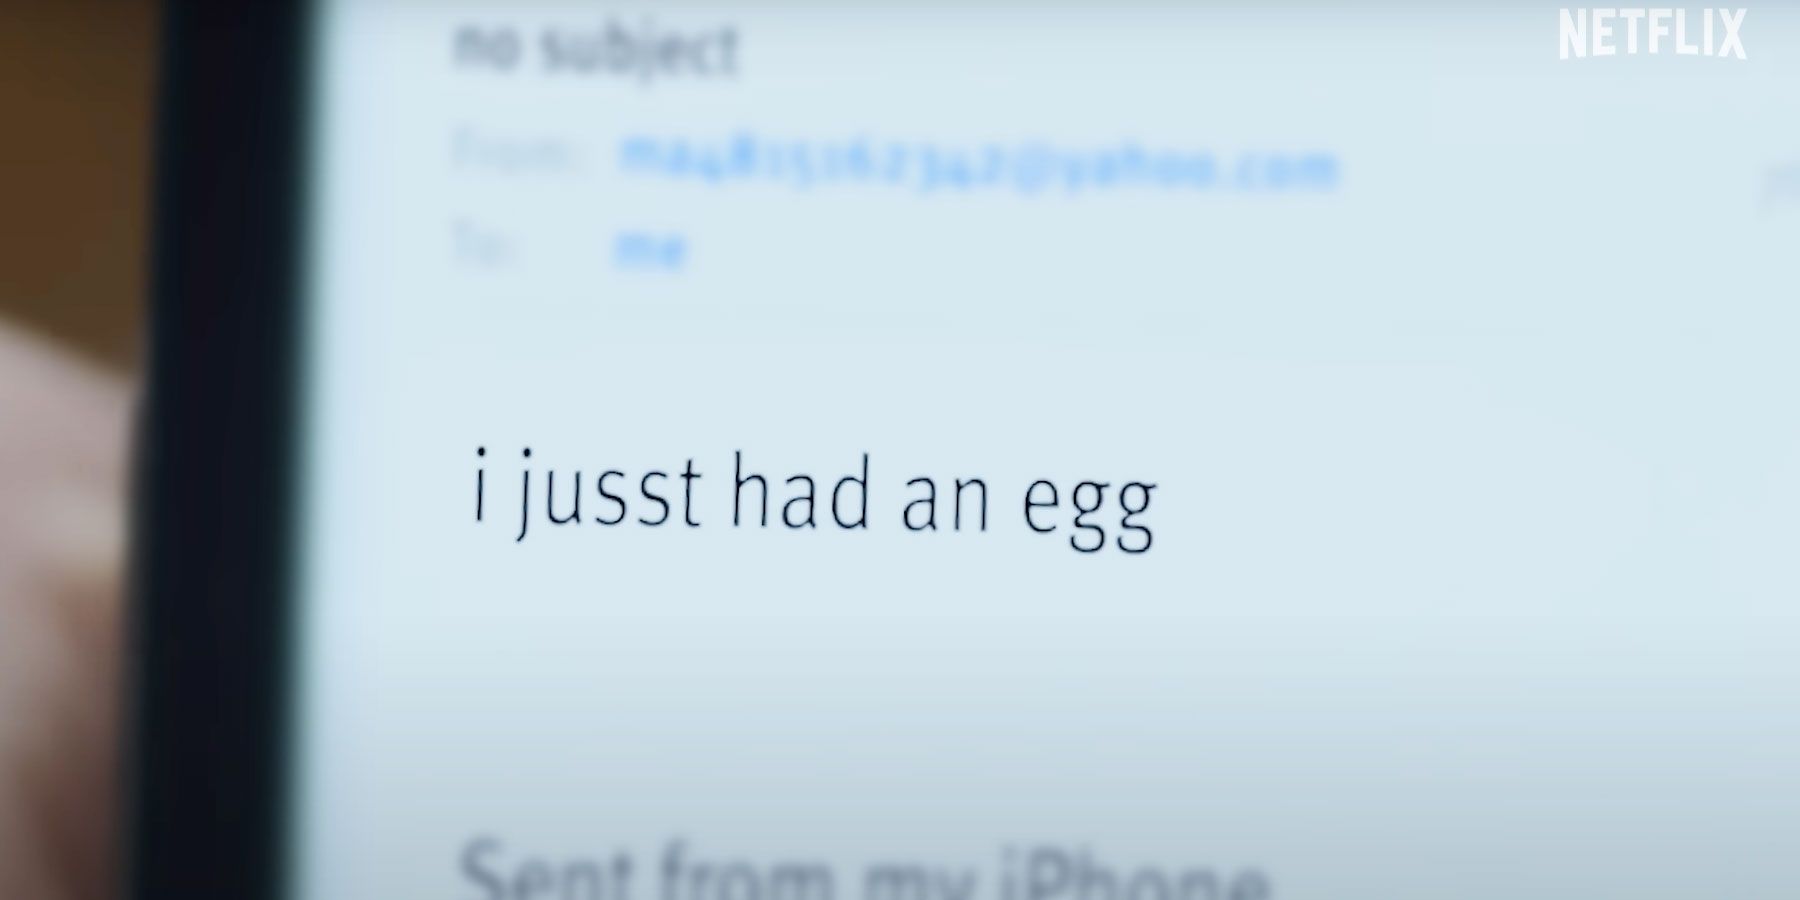 Martha's text to Donny in Baby Reindeer telling him she just had an egg